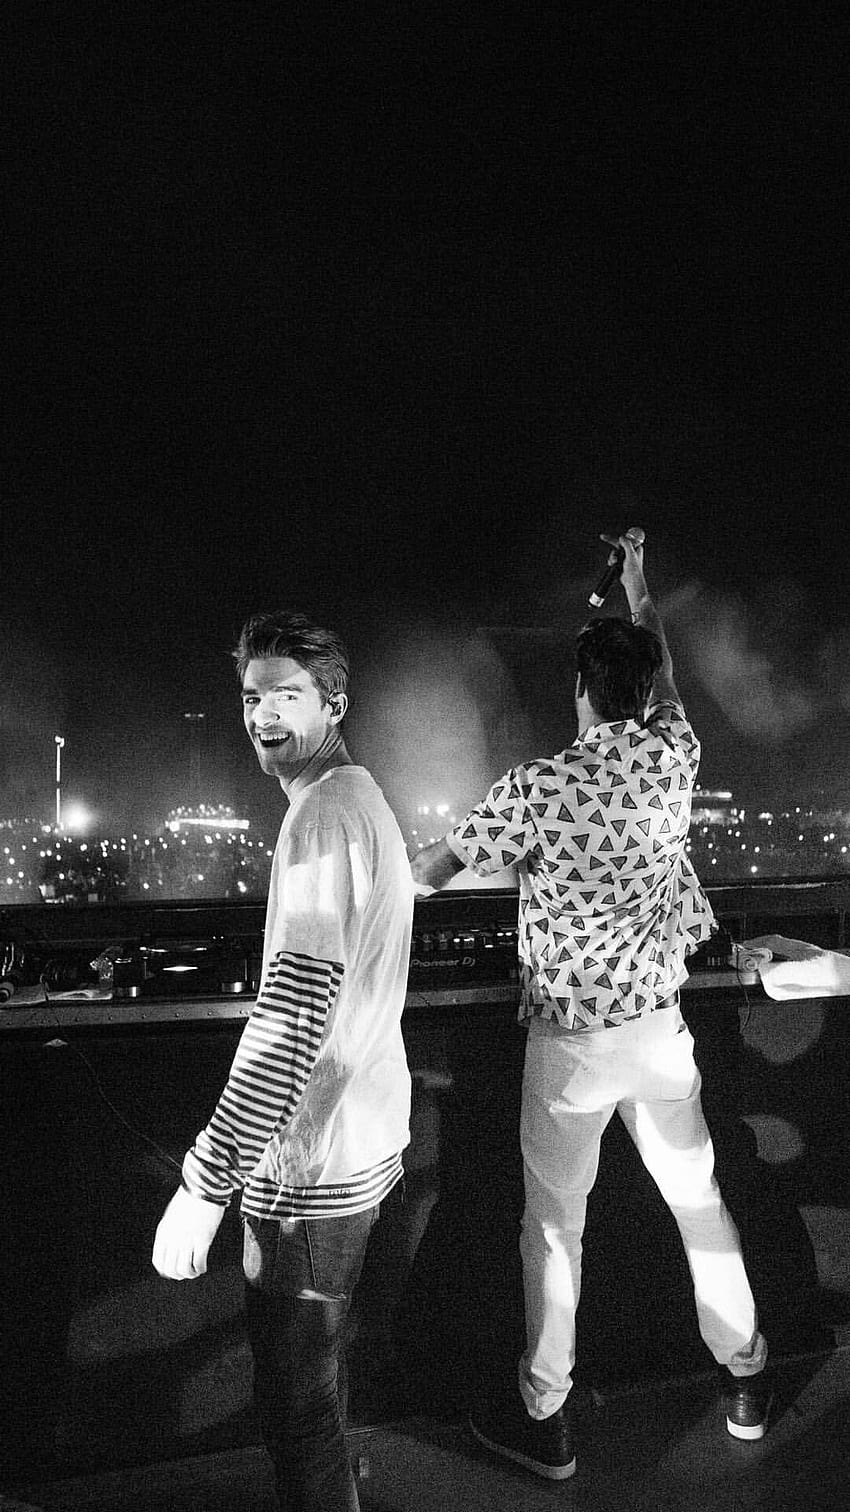 The chainsmokers group HD wallpapers